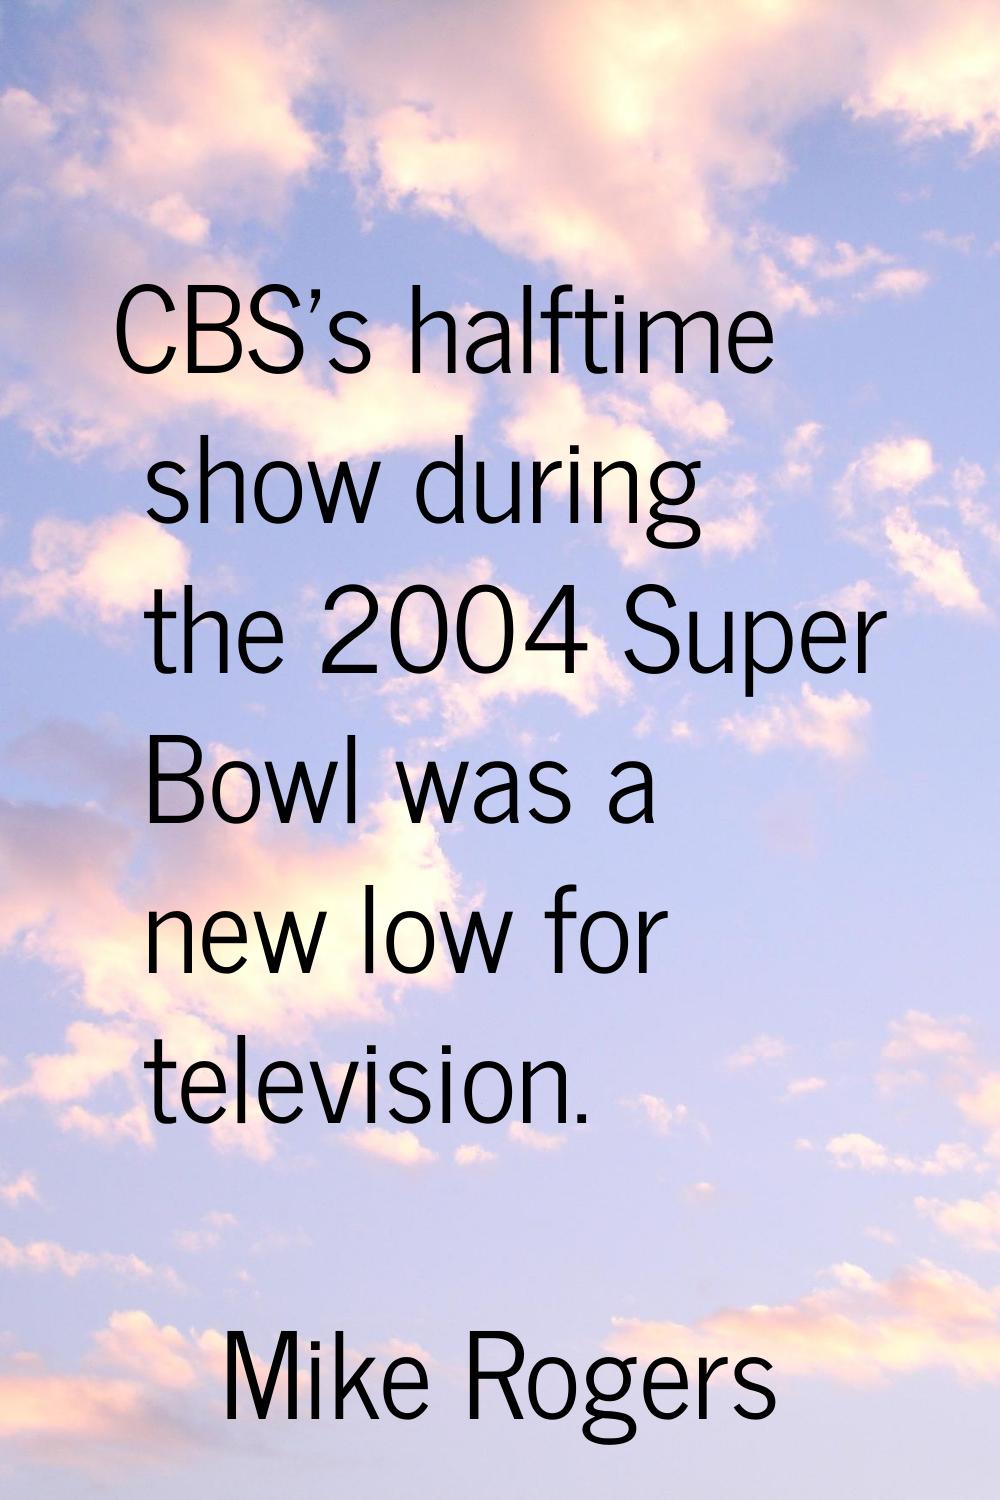 CBS's halftime show during the 2004 Super Bowl was a new low for television.